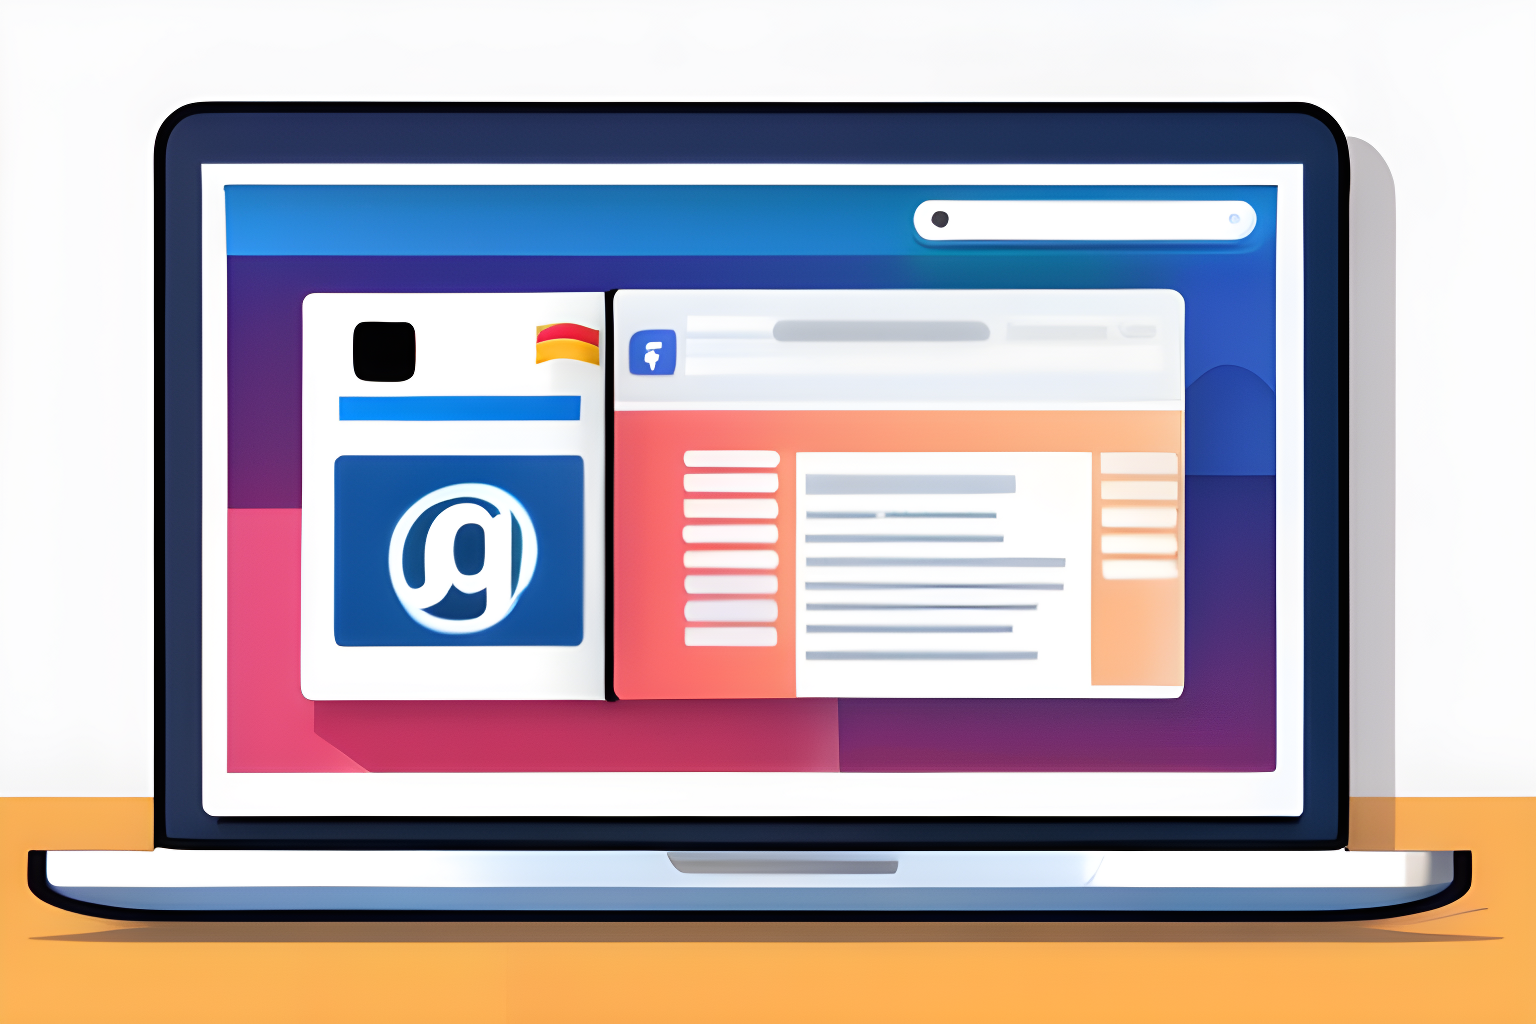 Illustrate an open laptop displaying facebook and instagram logos.